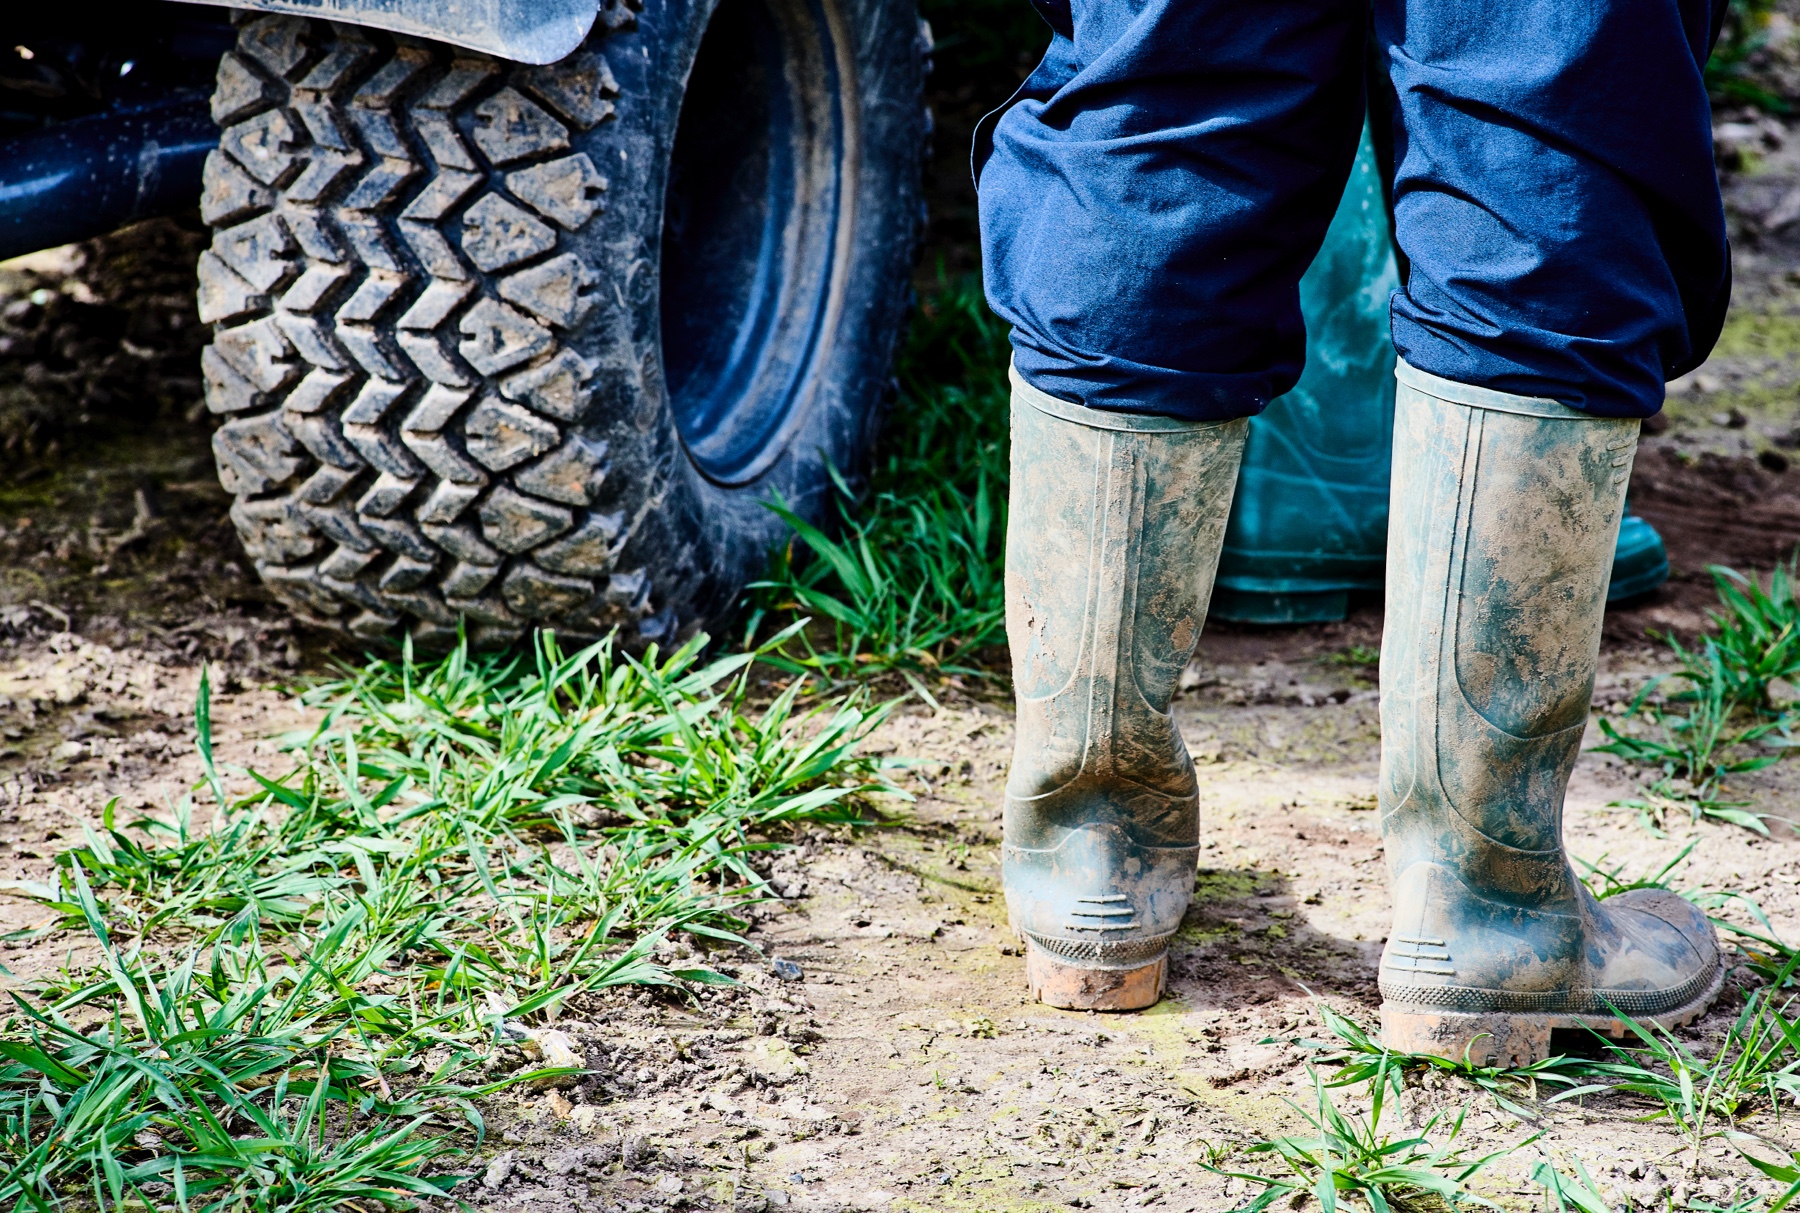 A Farm worker wearing muddy Welly Boots next to a farm vehicle